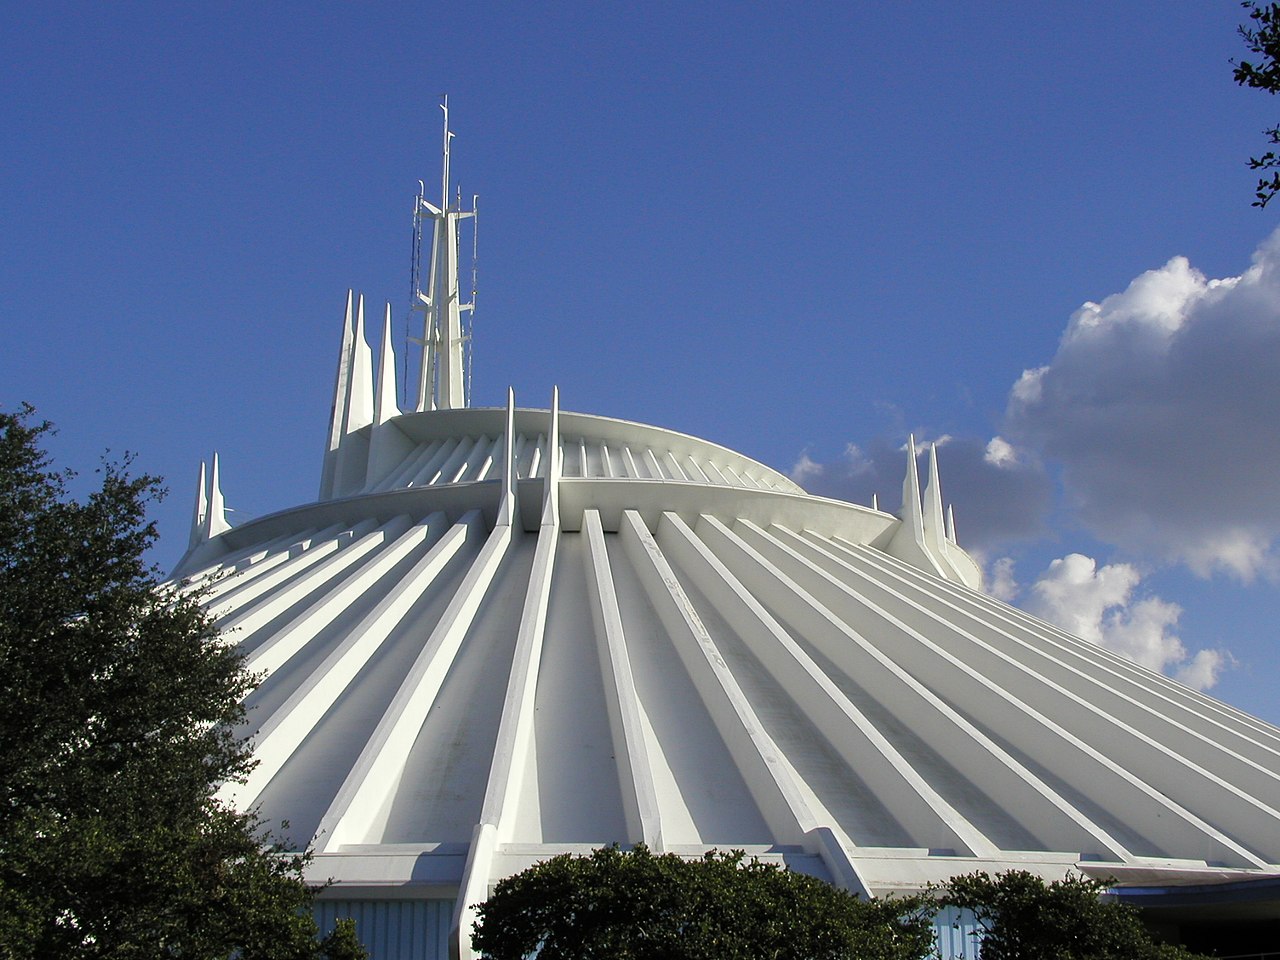 Space Mountain, By Benjamin D. Esham / Wikimedia Commons, CC BY-SA 4.0, https://commons.wikimedia.org/w/index.php?curid=48824